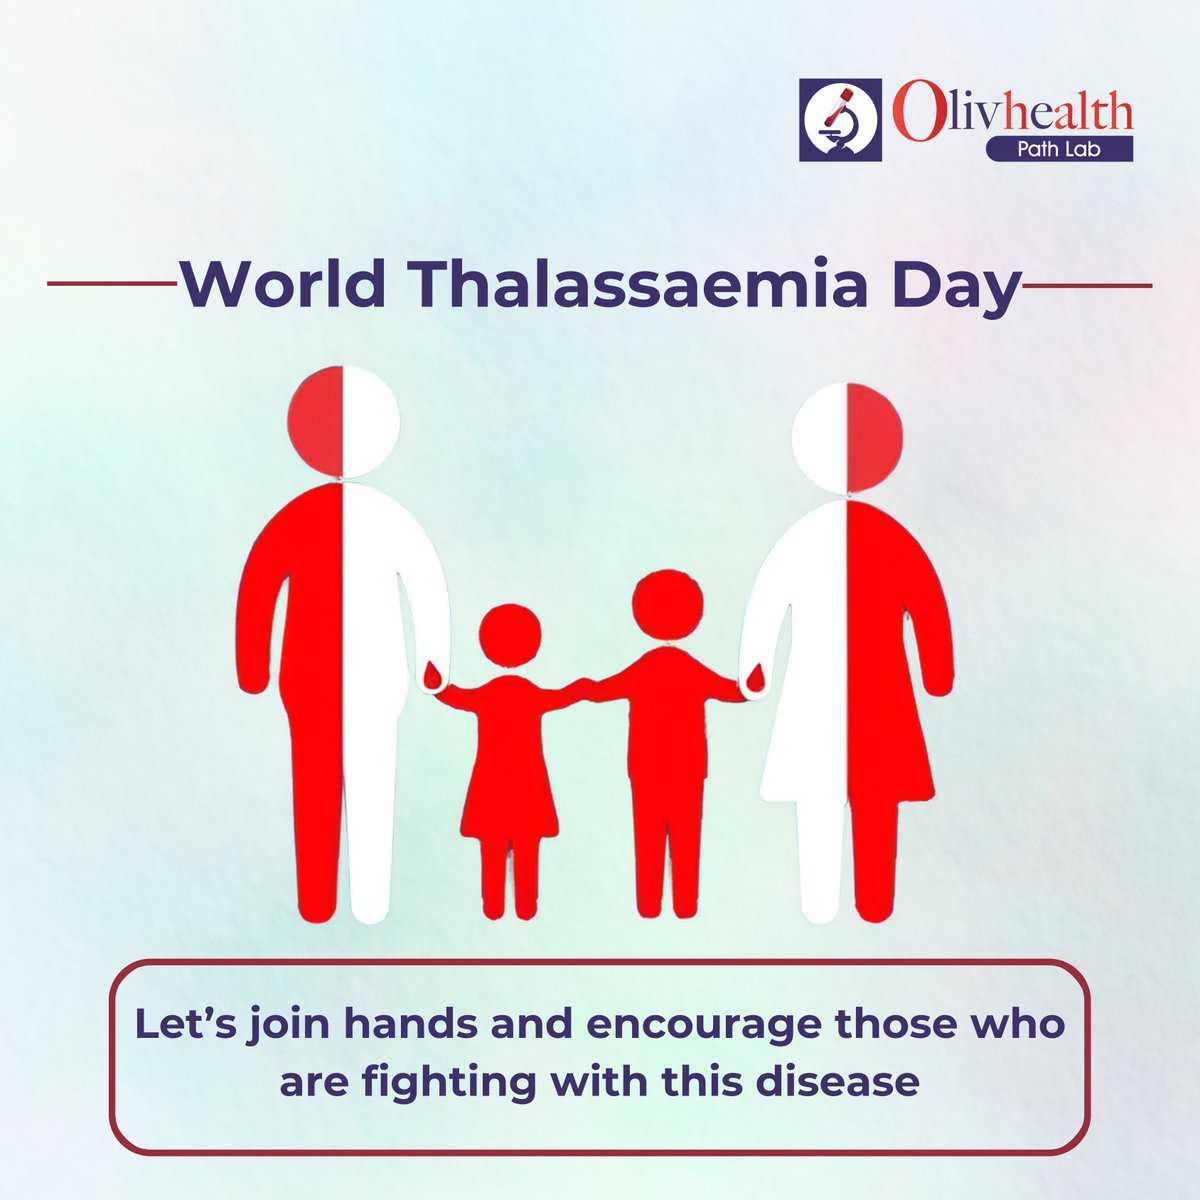 World Thalassemia Day reminds us that we can all make a difference. Let's work together to improve the lives of those living with thalassemia.

#olivhealthpathlab #WorldThalassemiaDay #pathology #blooddonation